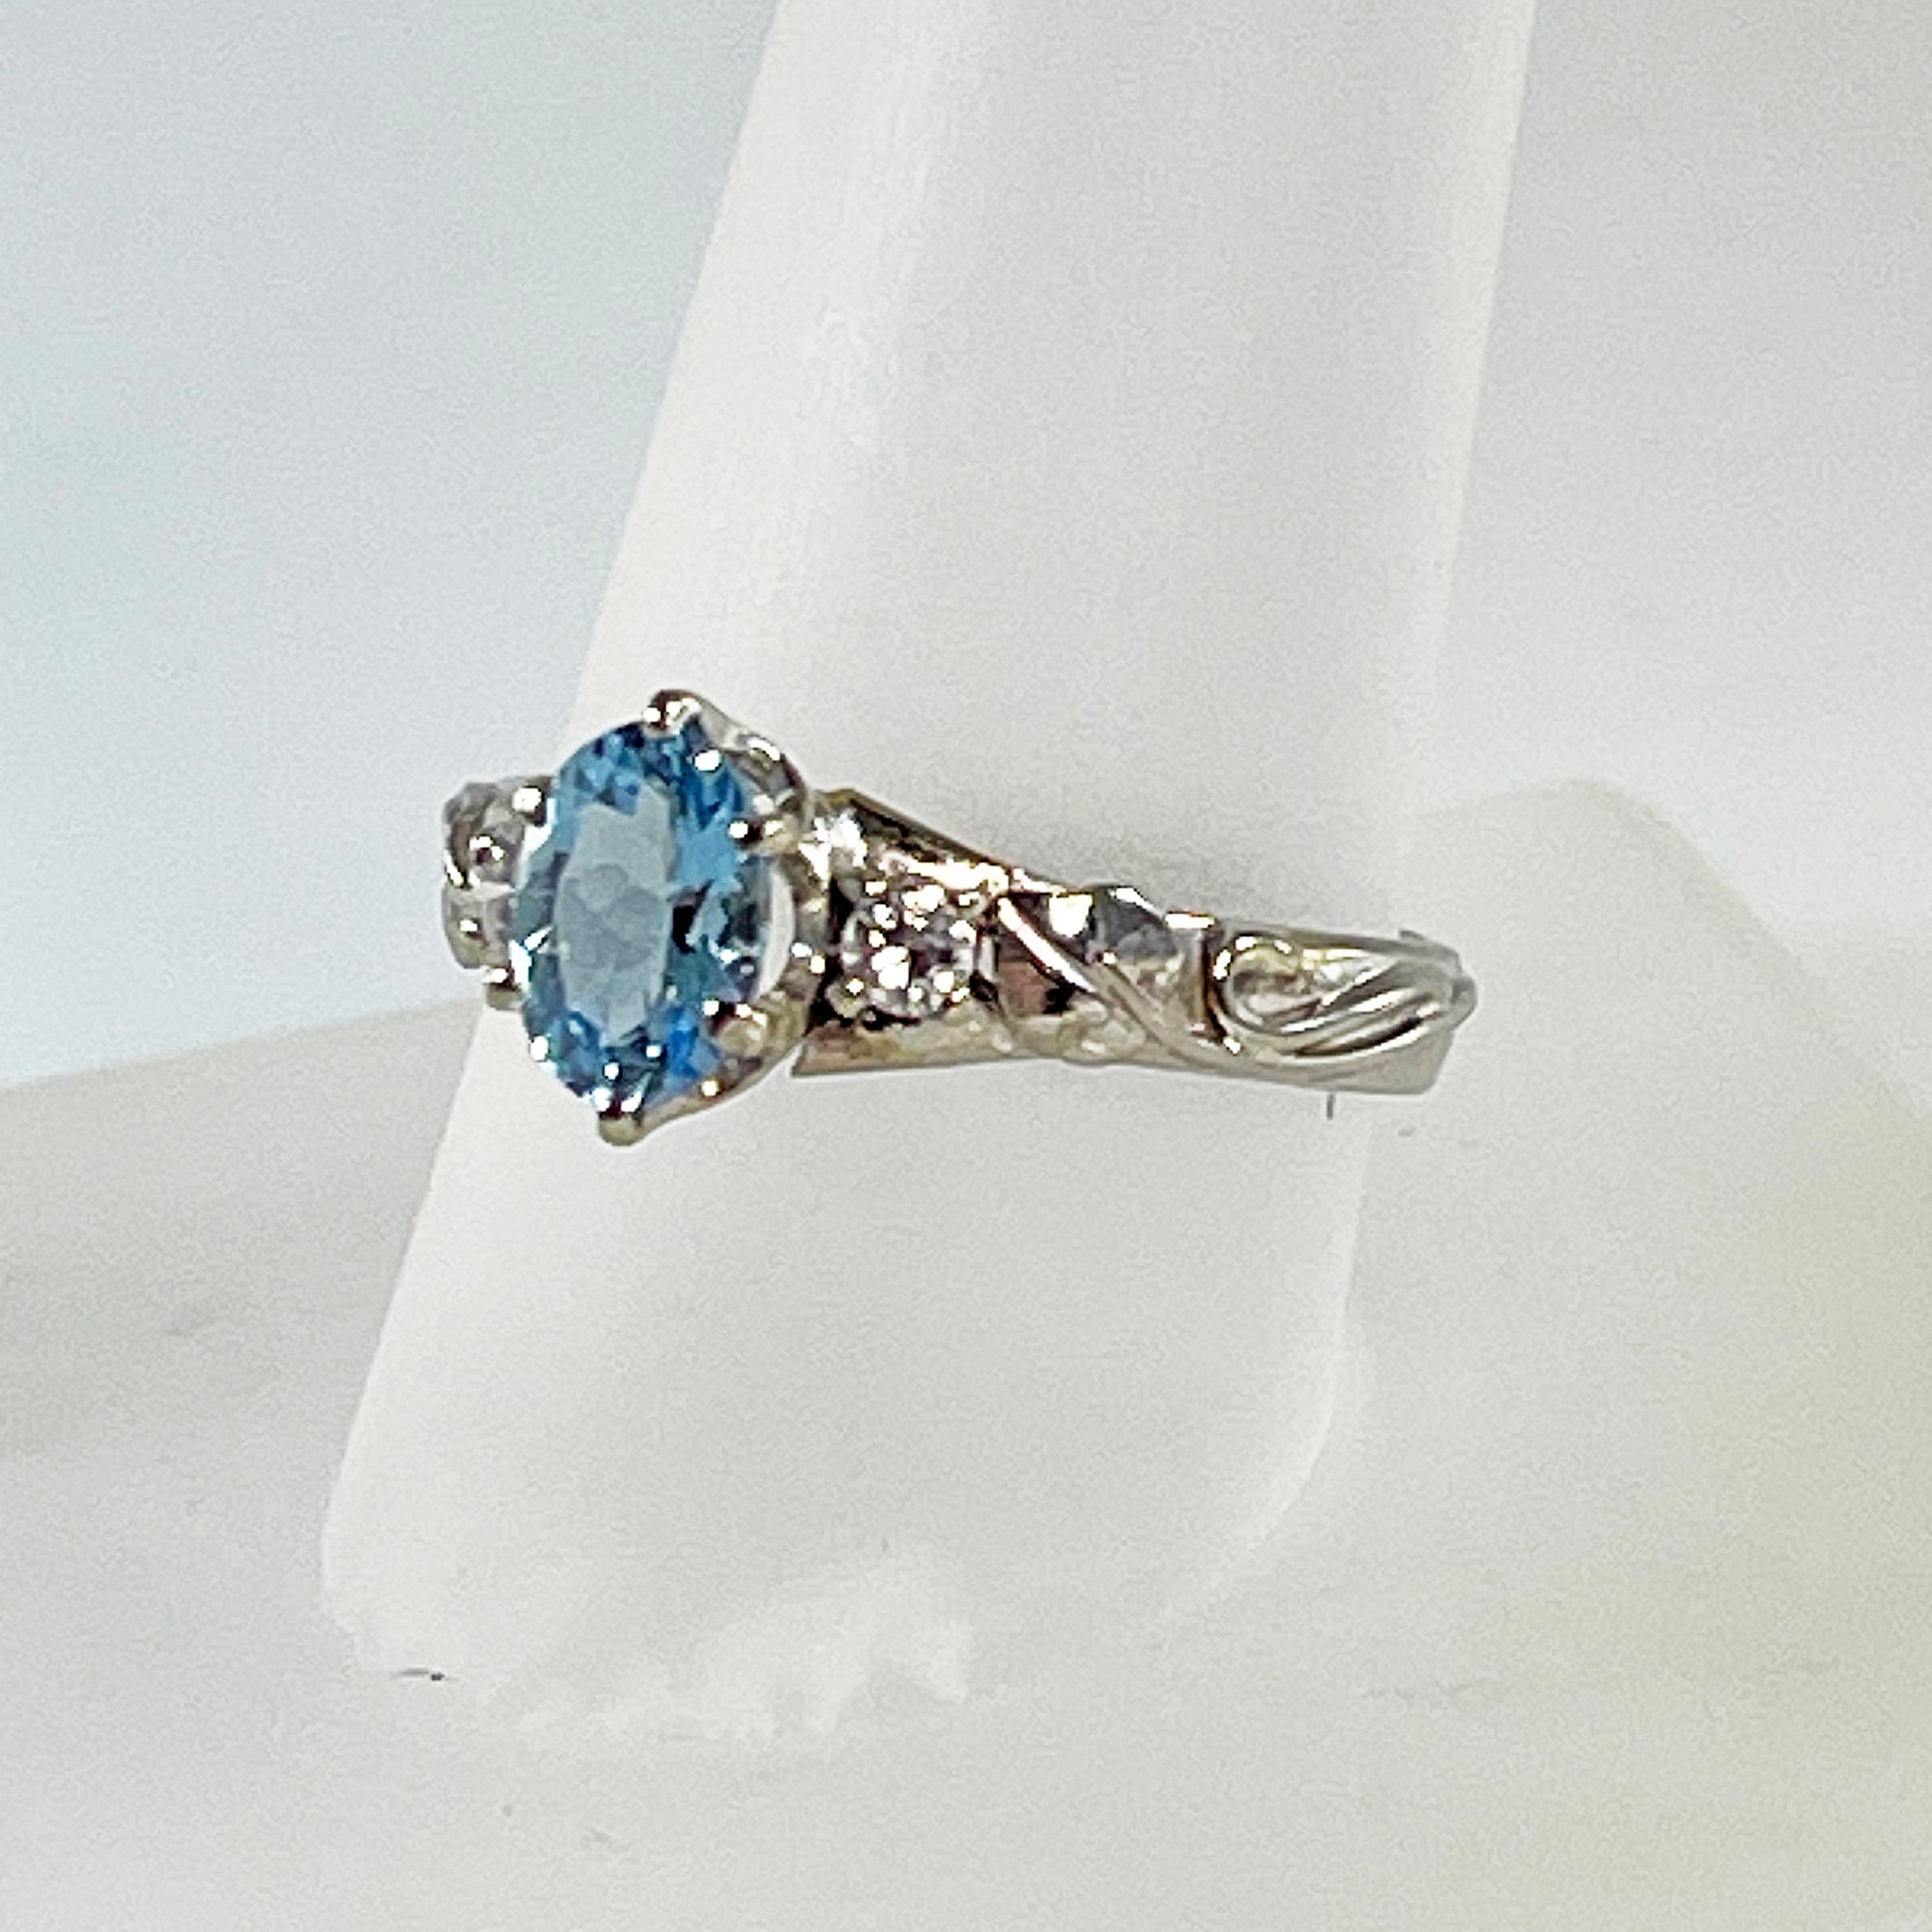 Cole Sheckler Ring - Aquamarine w/ Diamonds in 14k White Gold with Leaves